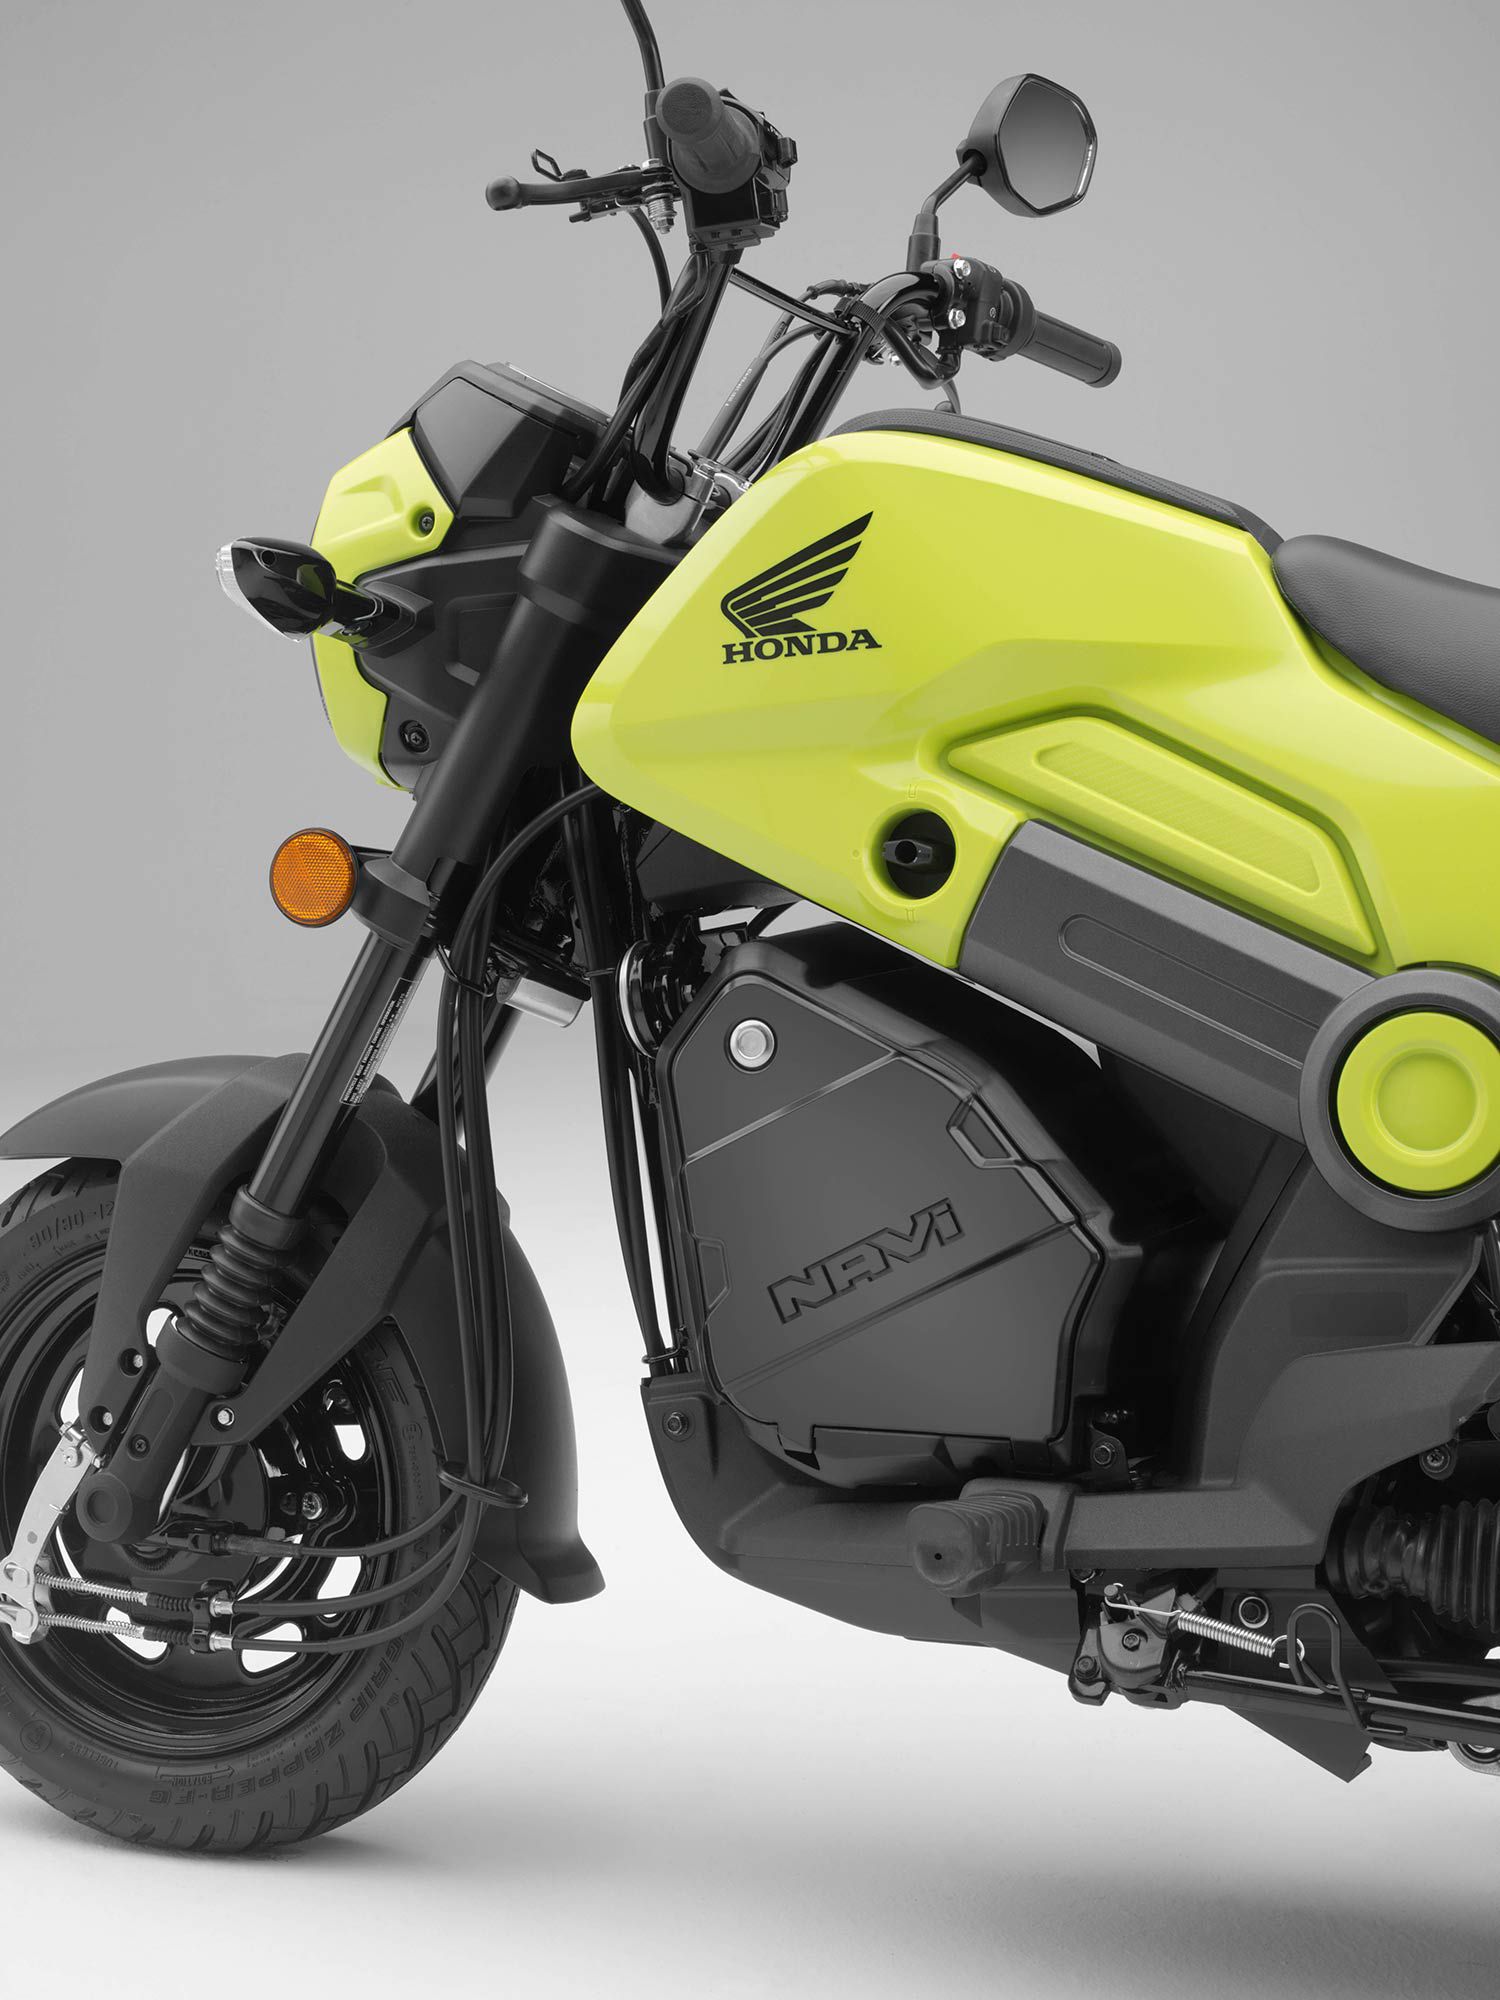 The Honda Navi has a fuel-sipping 110cc air-cooled single capable of netting 110 mpg.